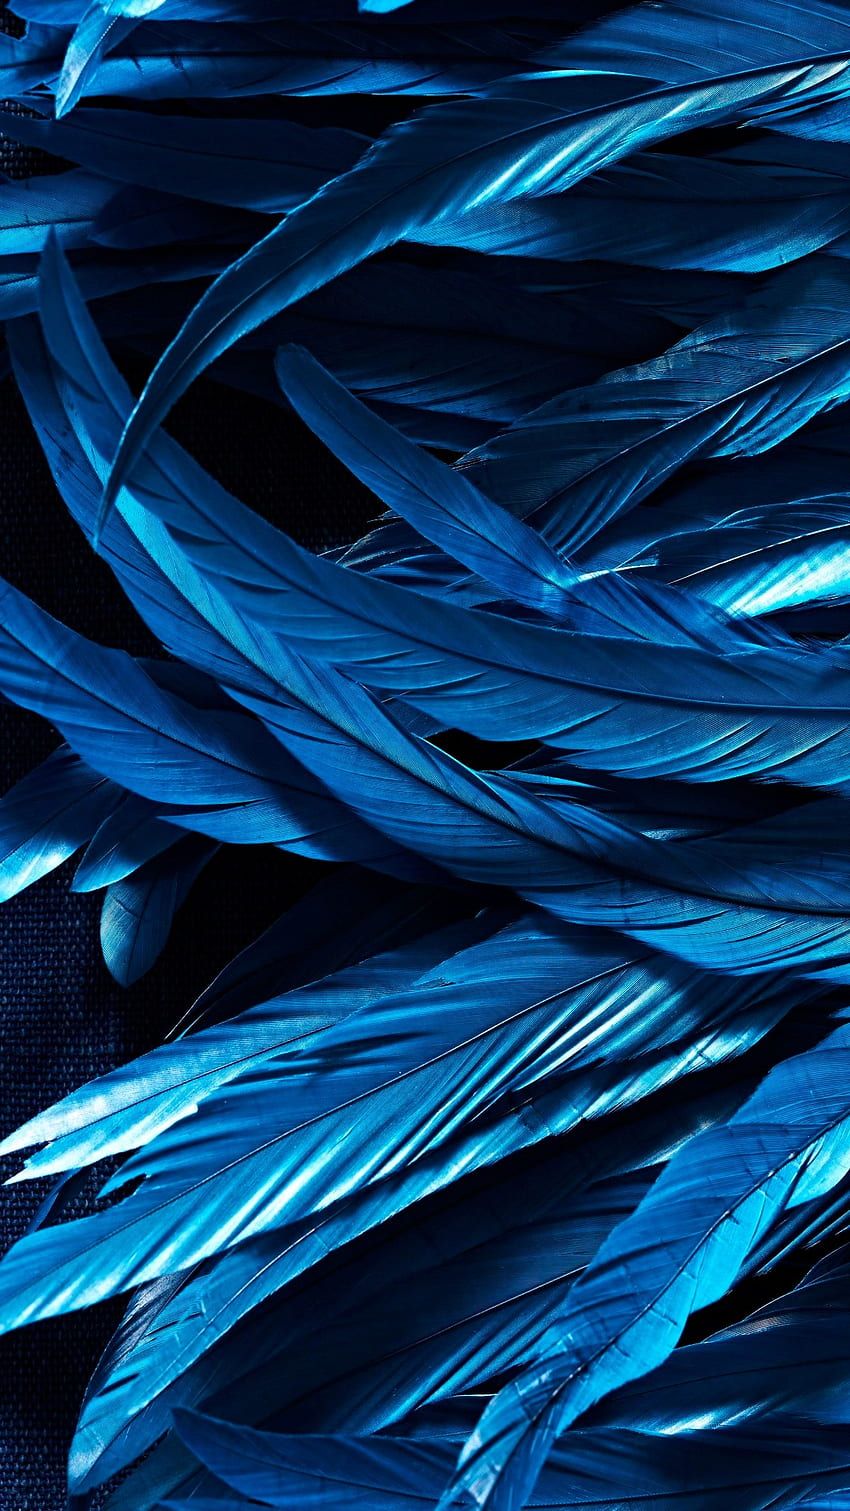 Blue feathers on a black background - Feathers